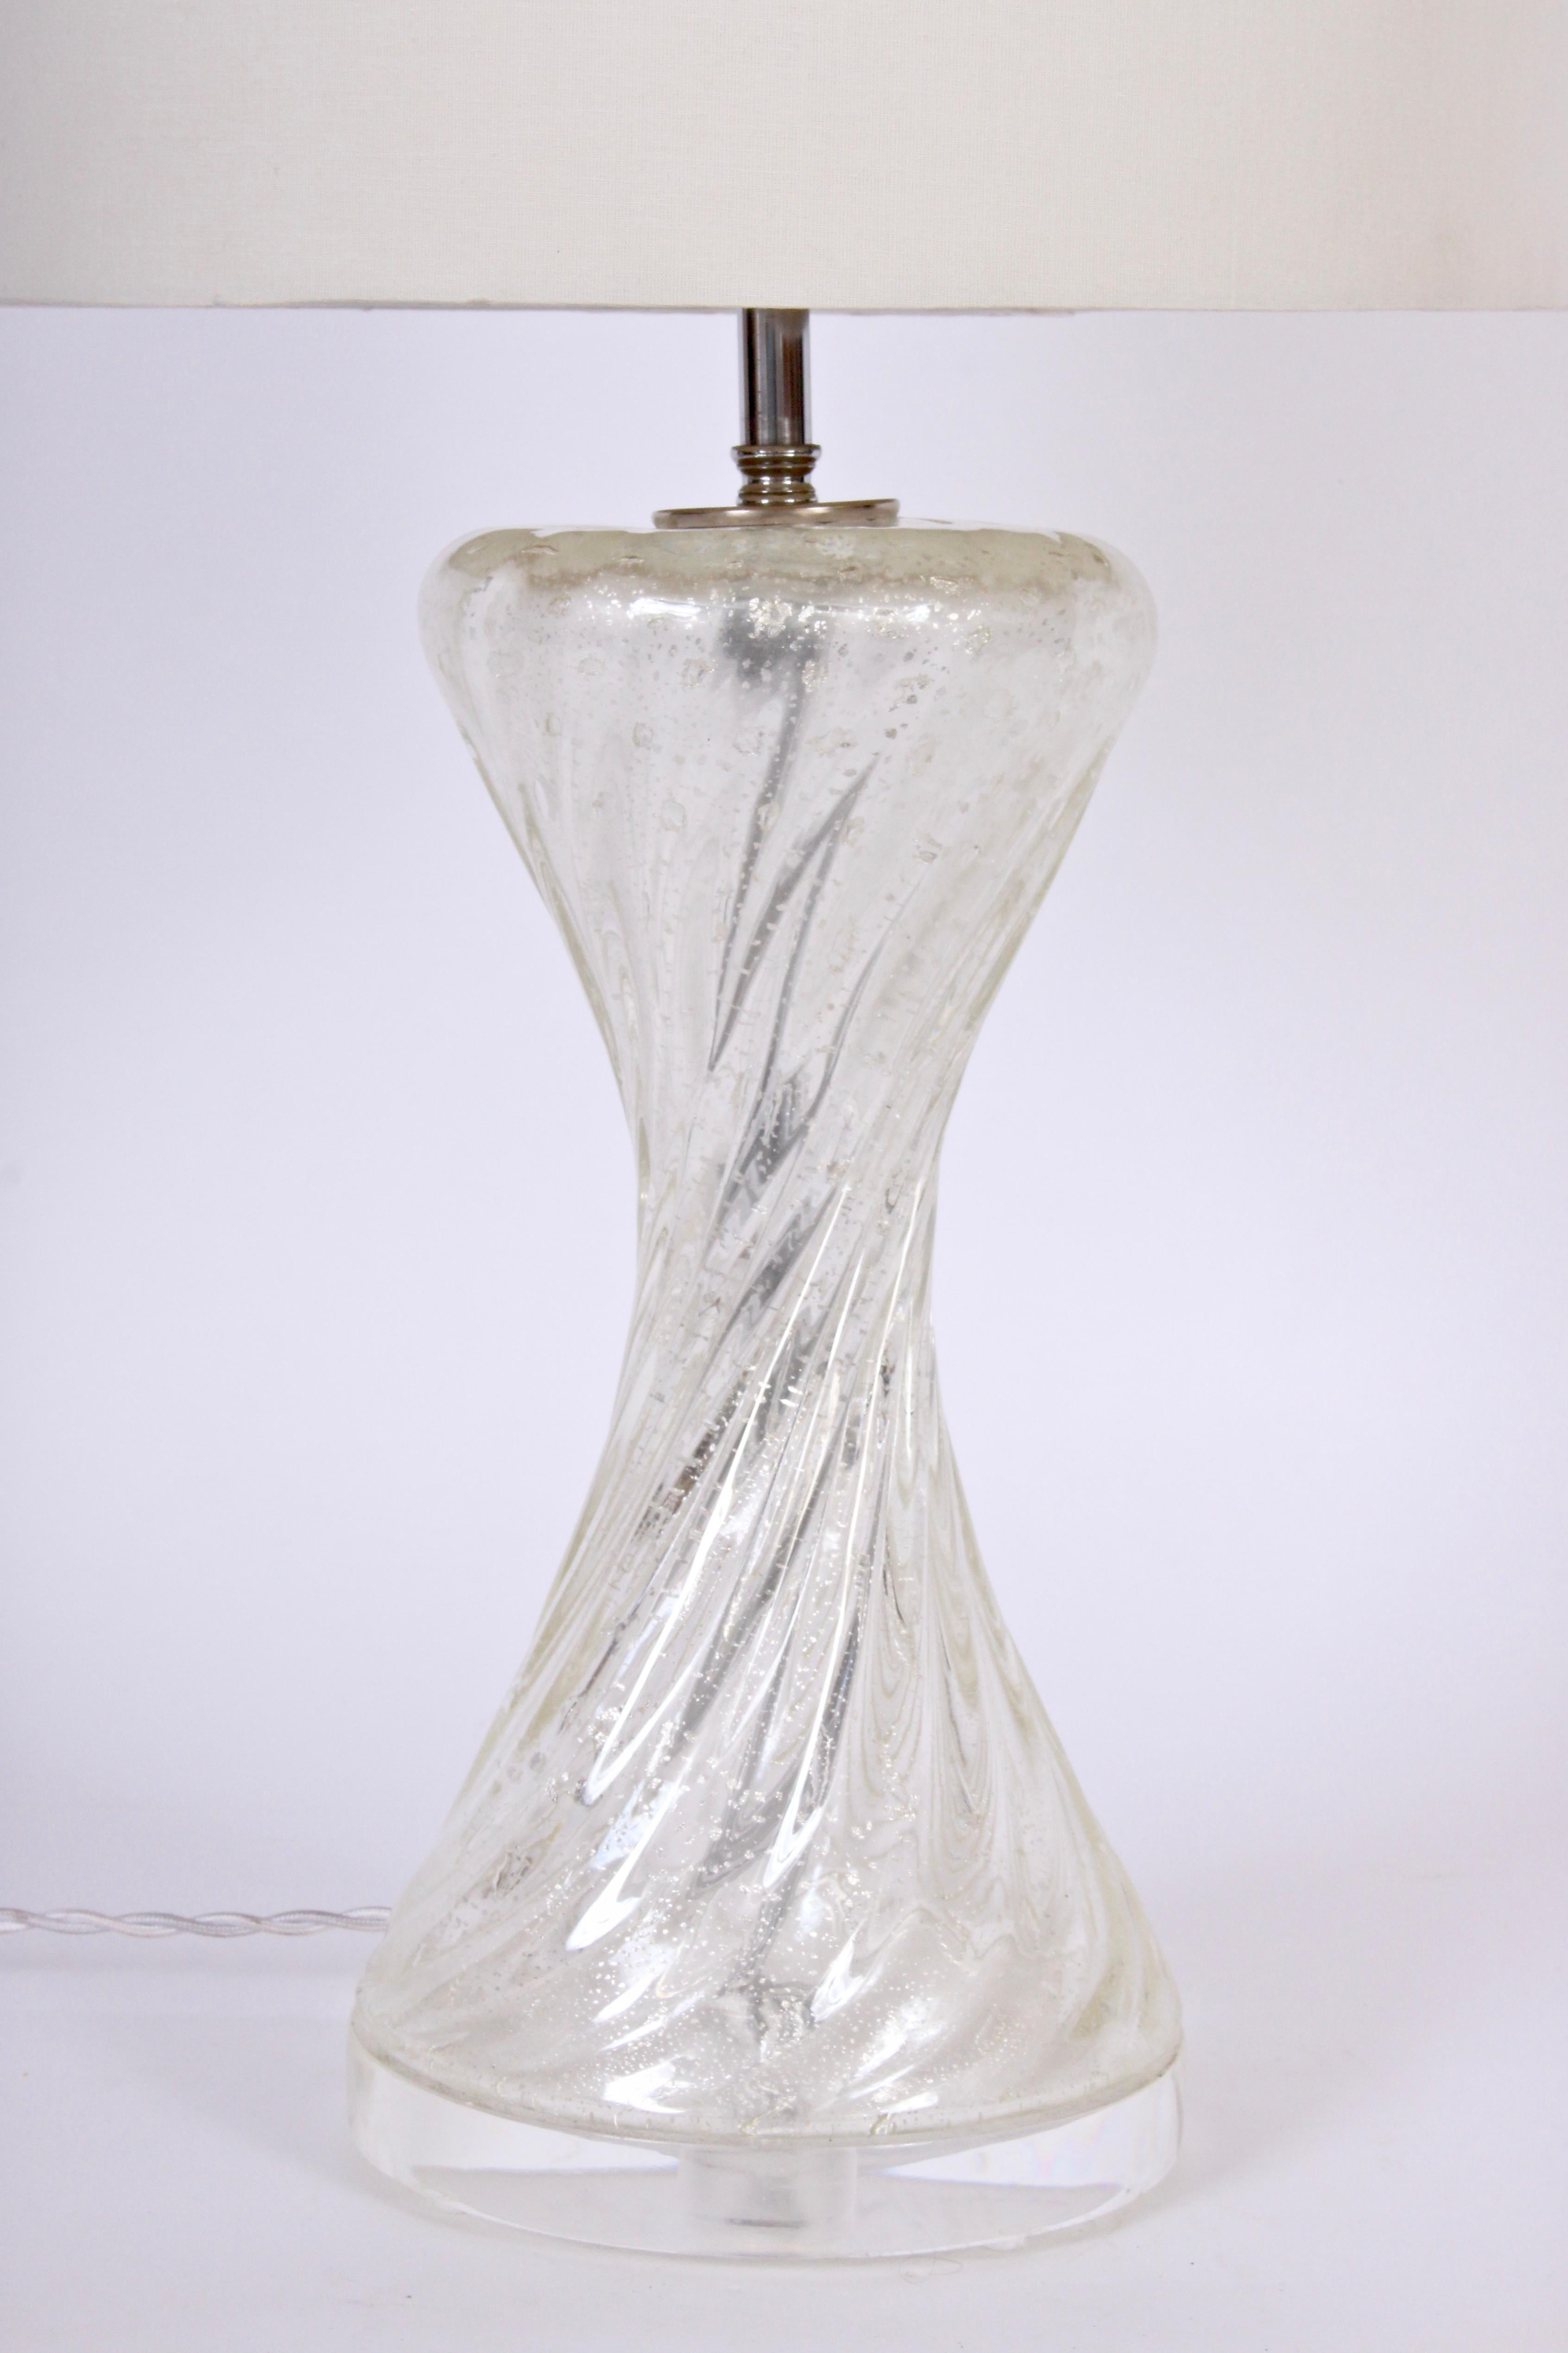 Italian Modern ribbed twist translucent Murano Glass Table Lamp with Silver inclusions. Featuring a smooth swirled hourglass form with bubbles and reflective silvered inclusions on a round Lucite base. Shade shown for display only and not for sale